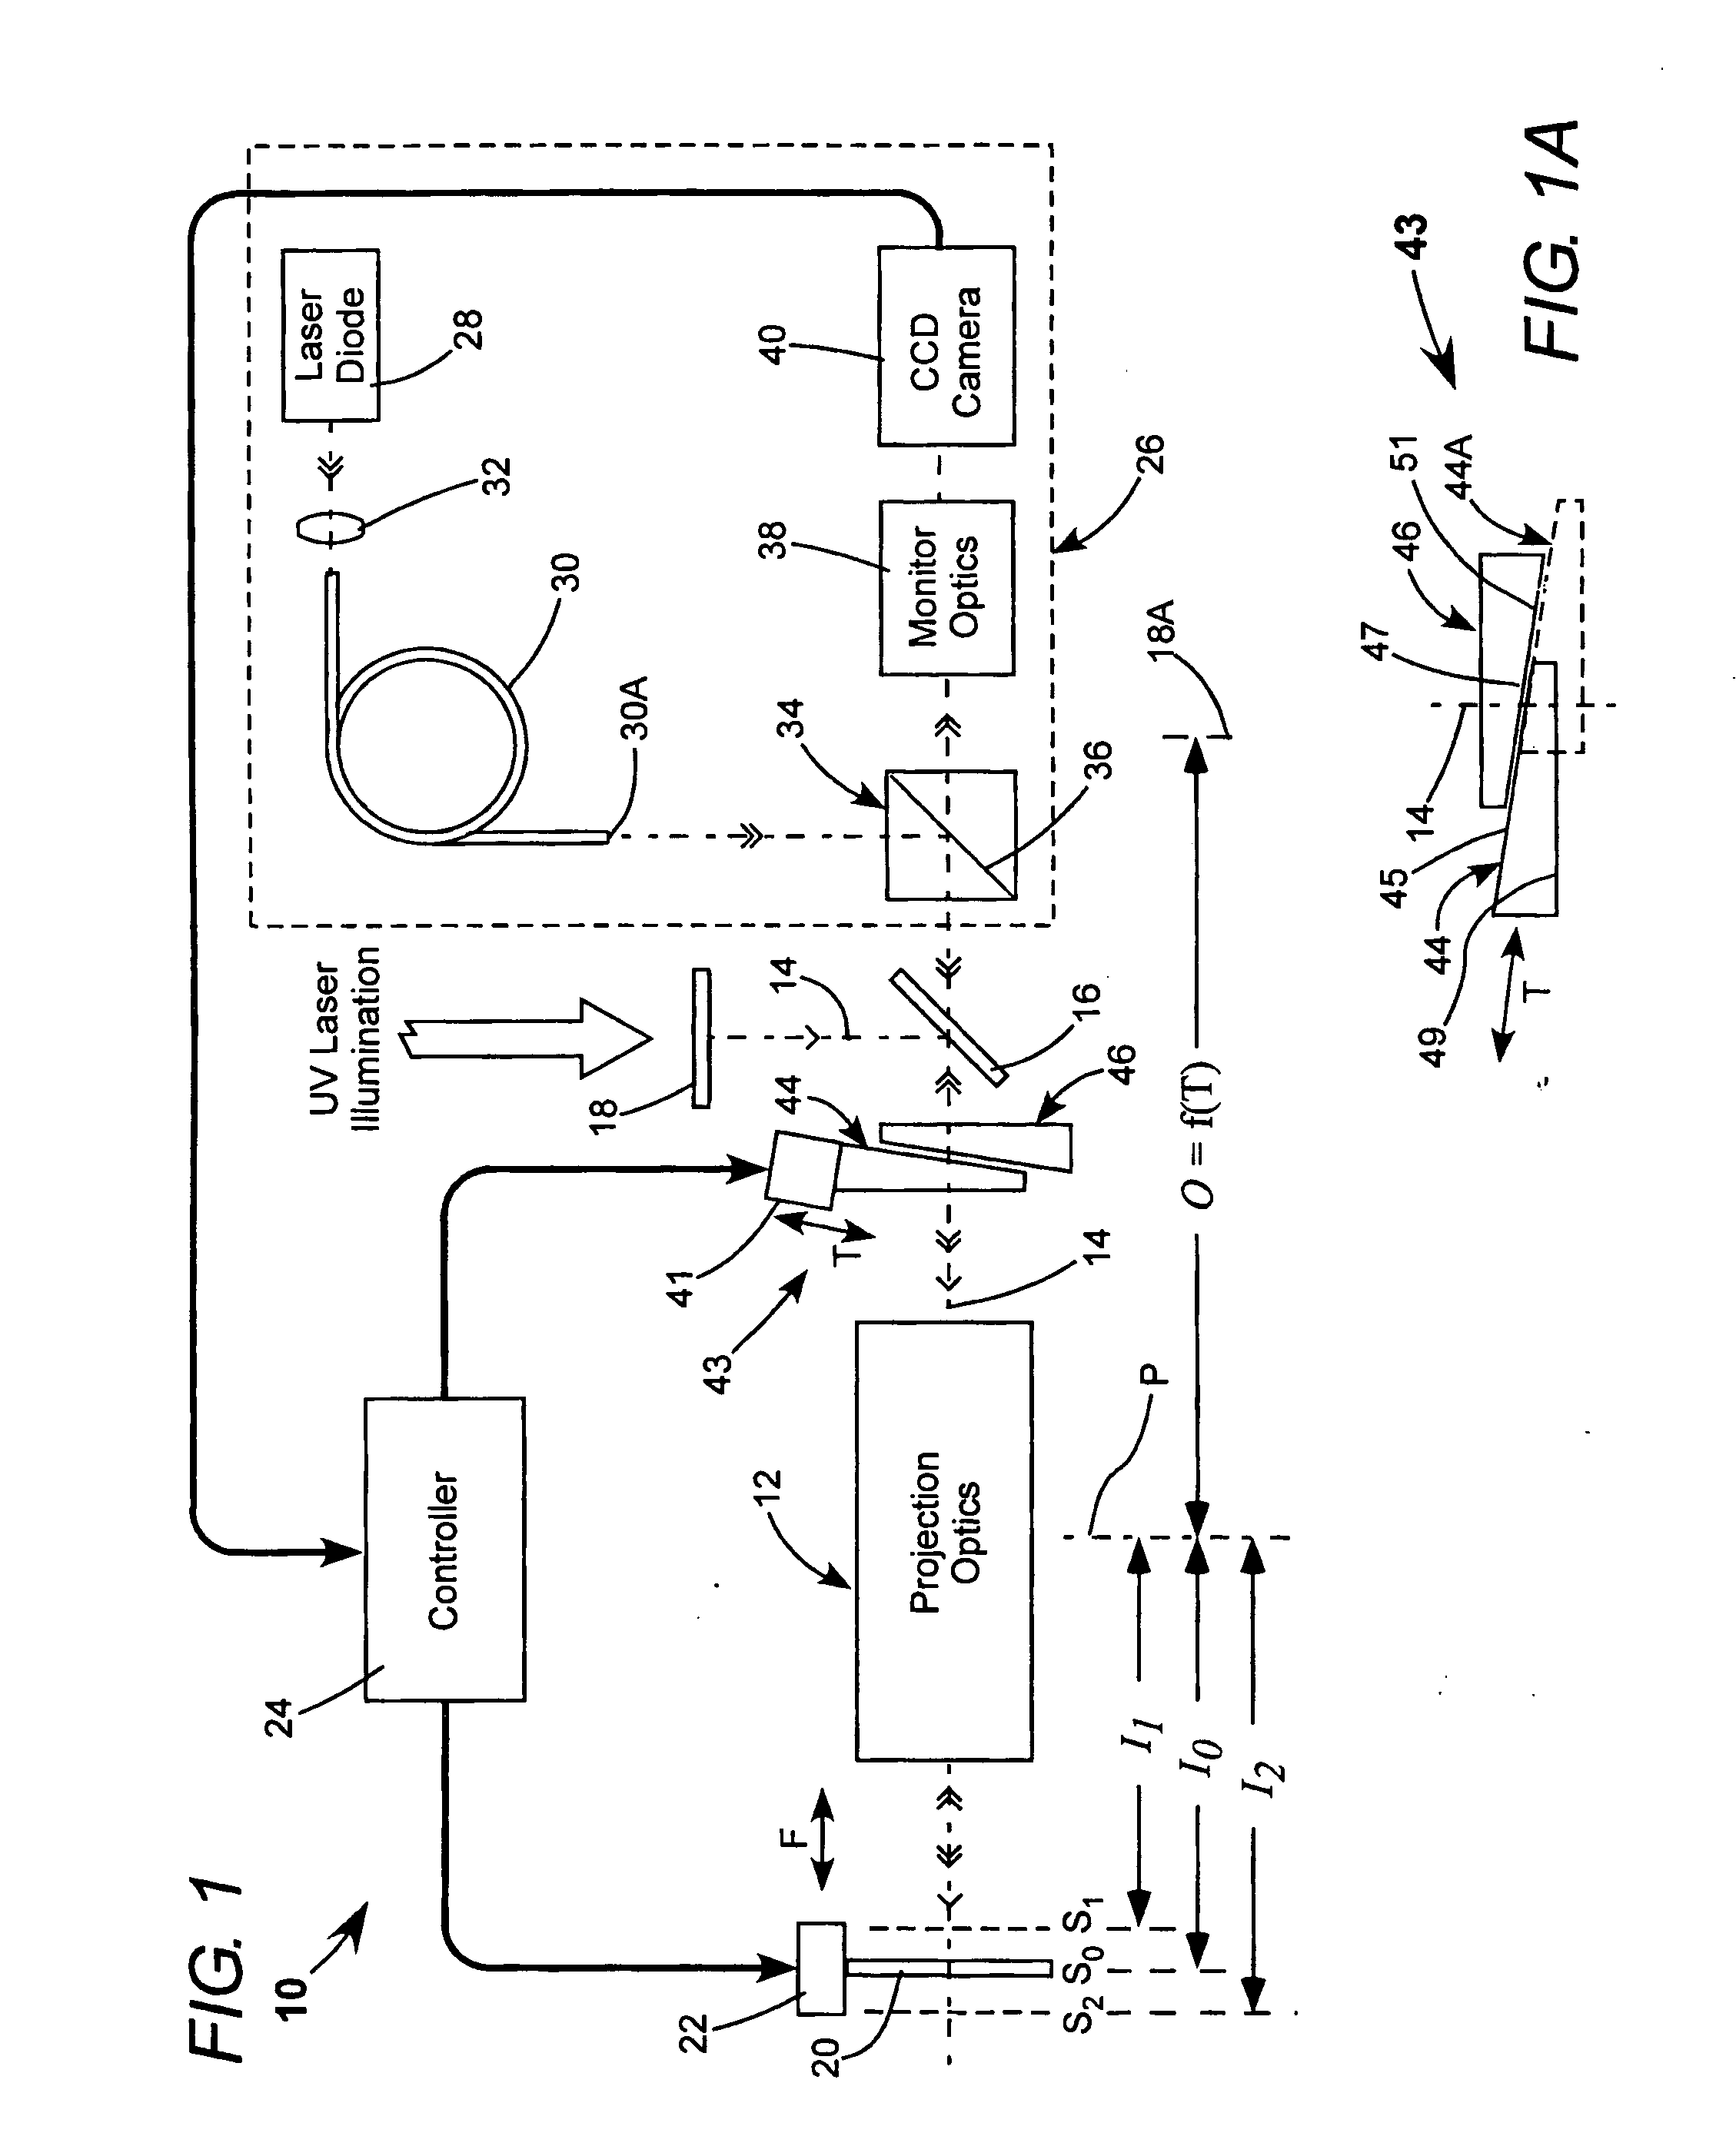 Method and apparatus for maintaining focus and magnification of a projected image